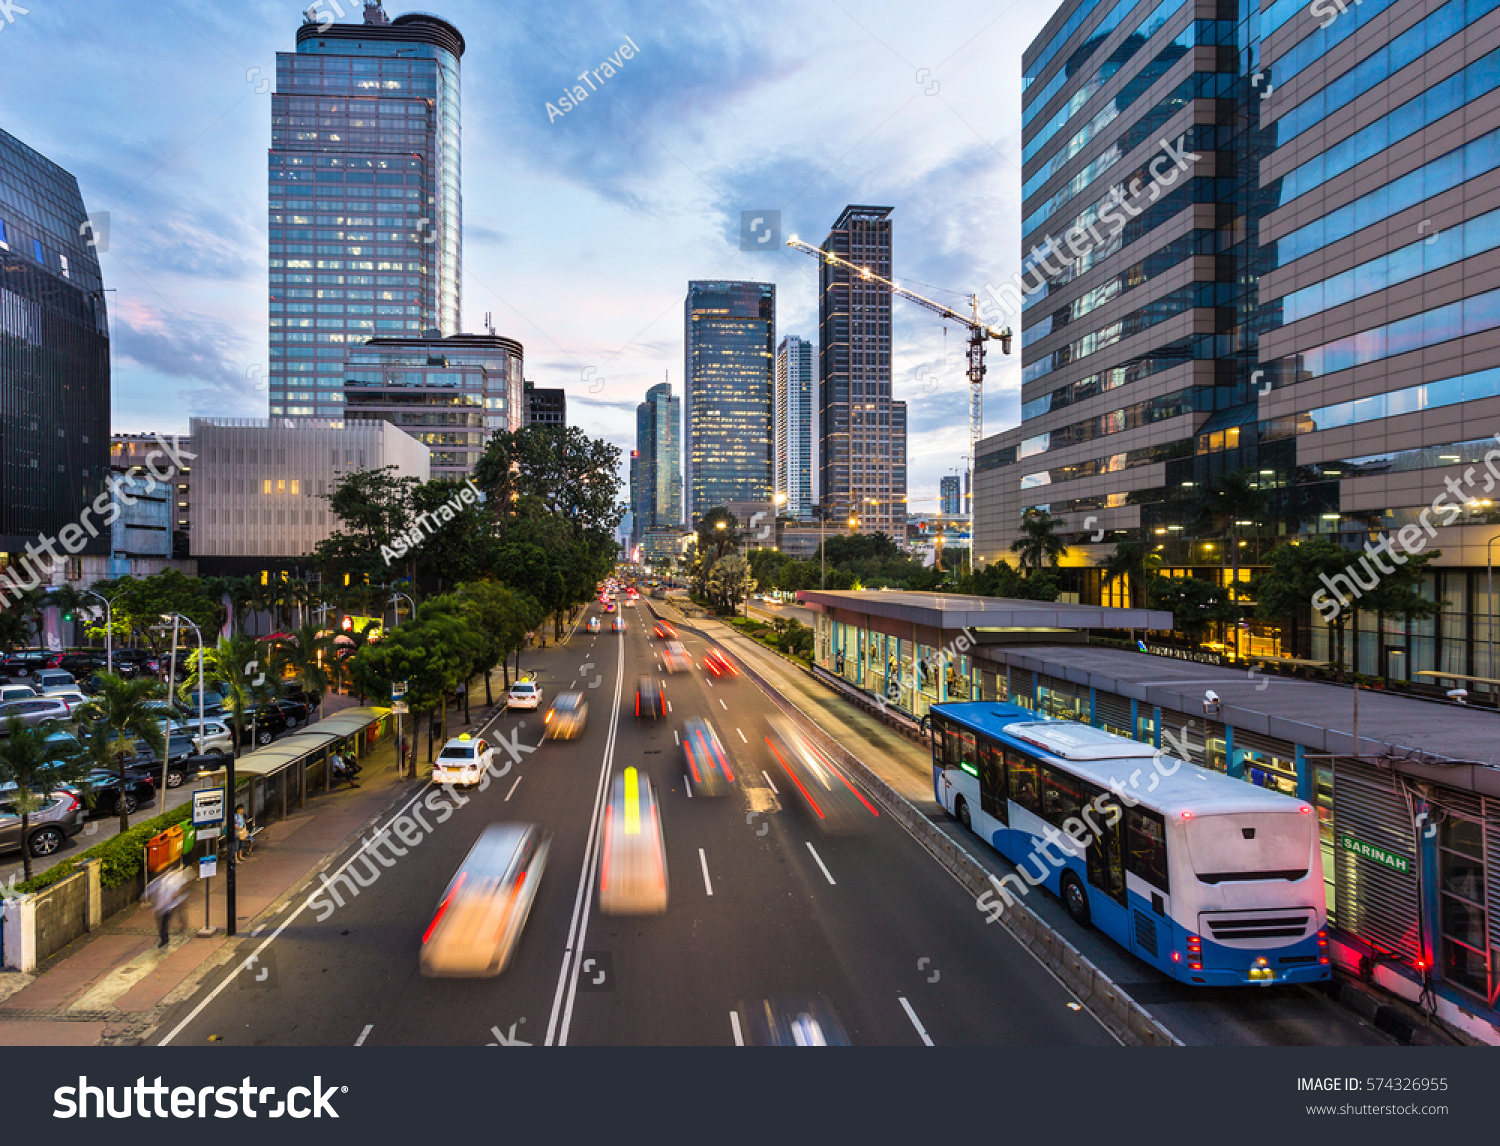 Traffic rushes in Jakarta business district along the city main avenue Jalan Thamrin at sunset in Indonesia capital city. The Transjakarta bus system enjoys its own traffic lane to avoid congestion. #574326955